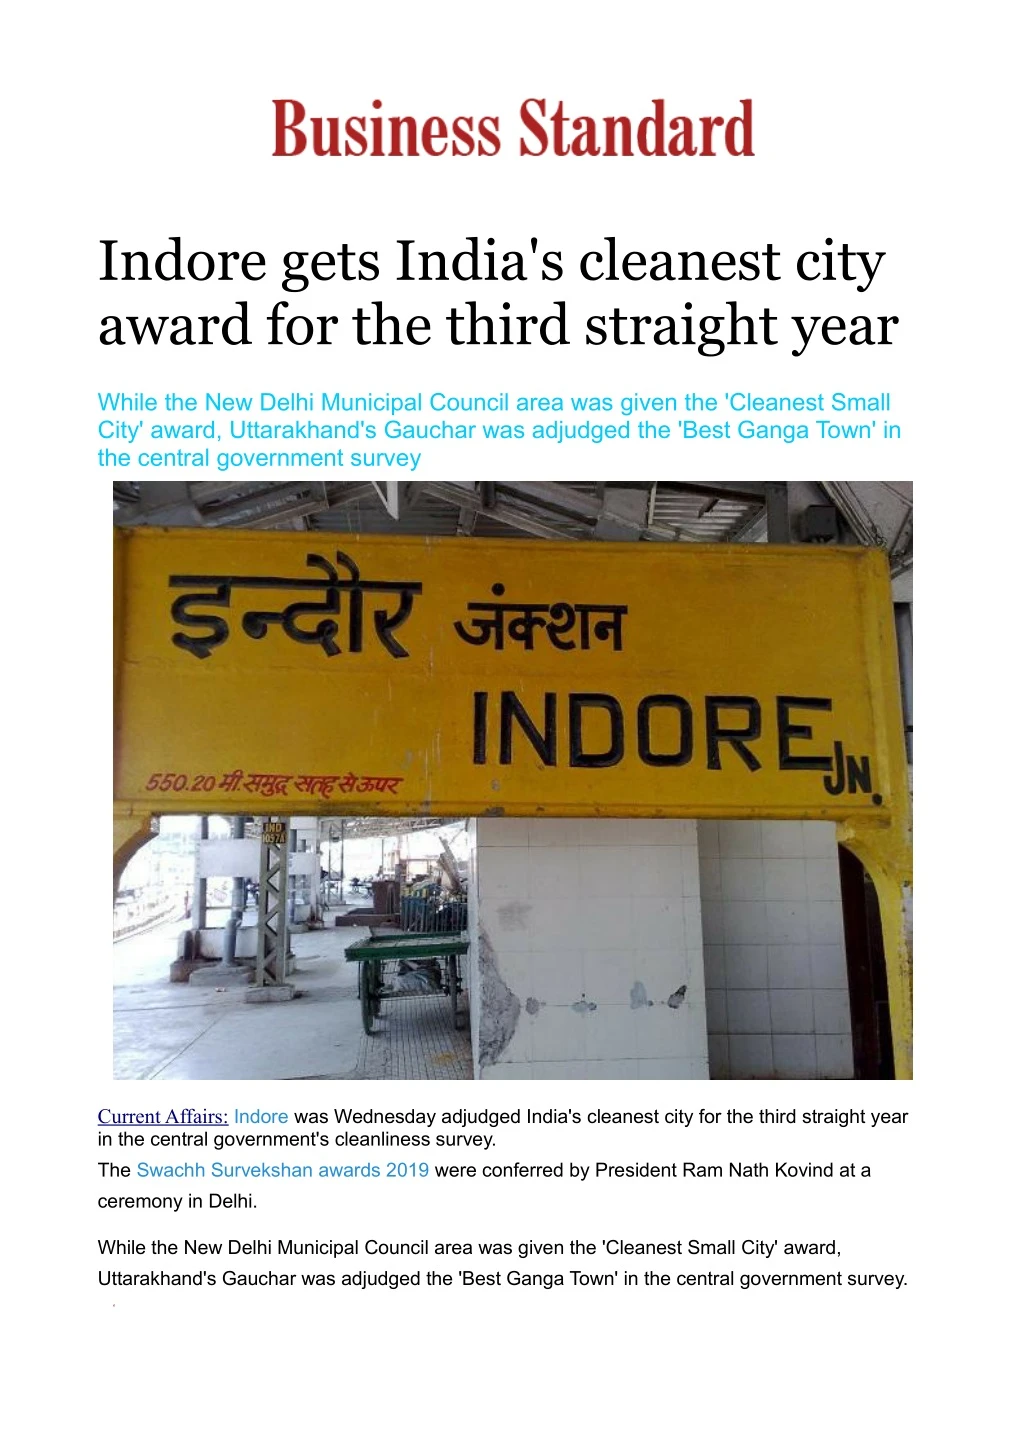 indore gets india s cleanest city award